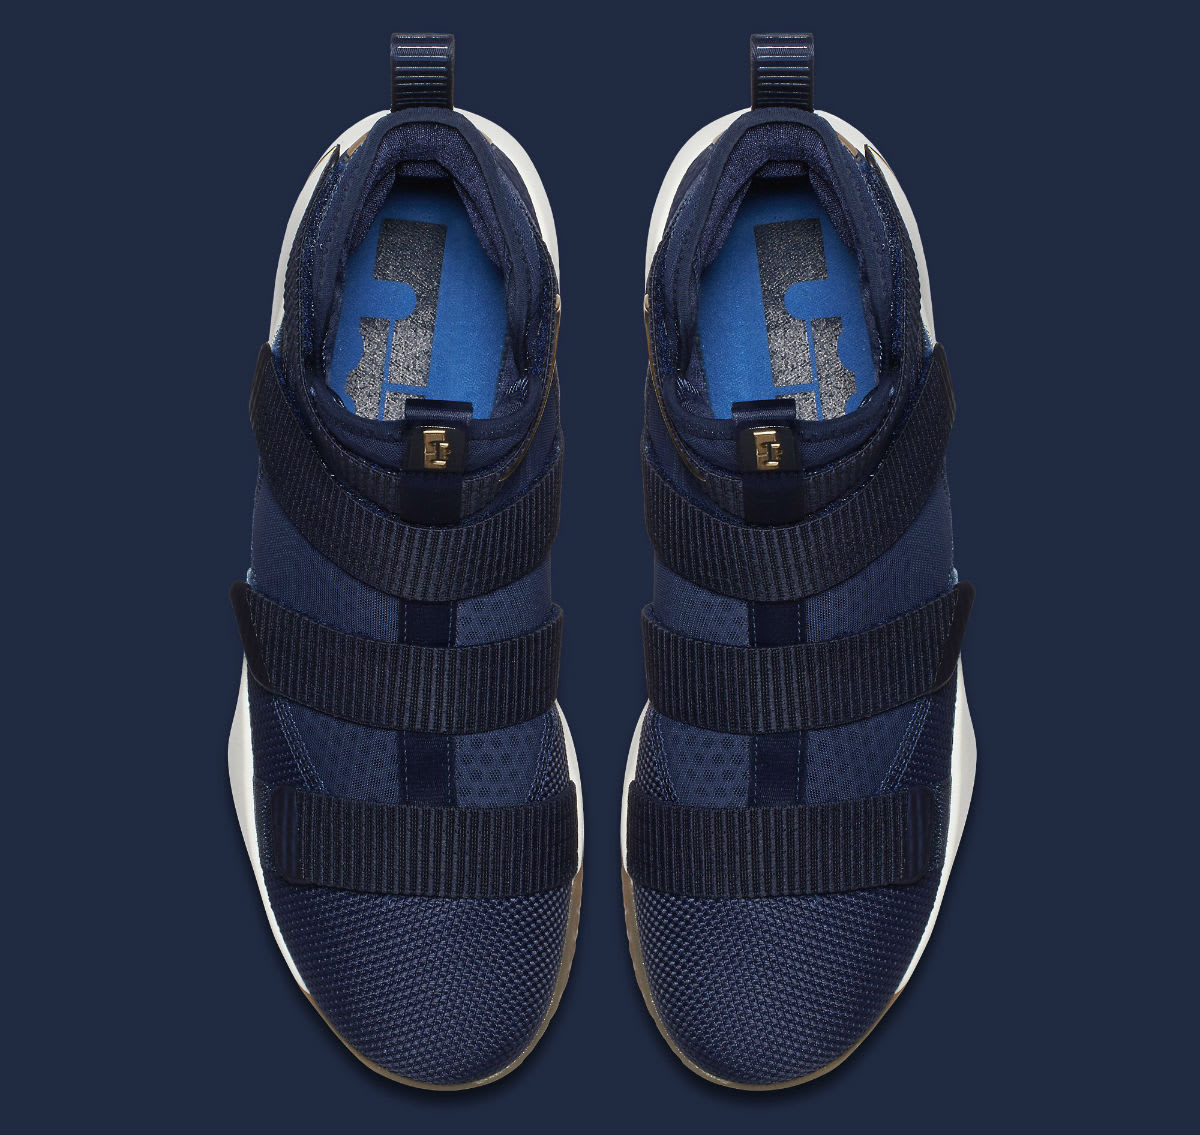 Nike LeBron Soldier 11 Cavs Navy Release Date Top 897644-402